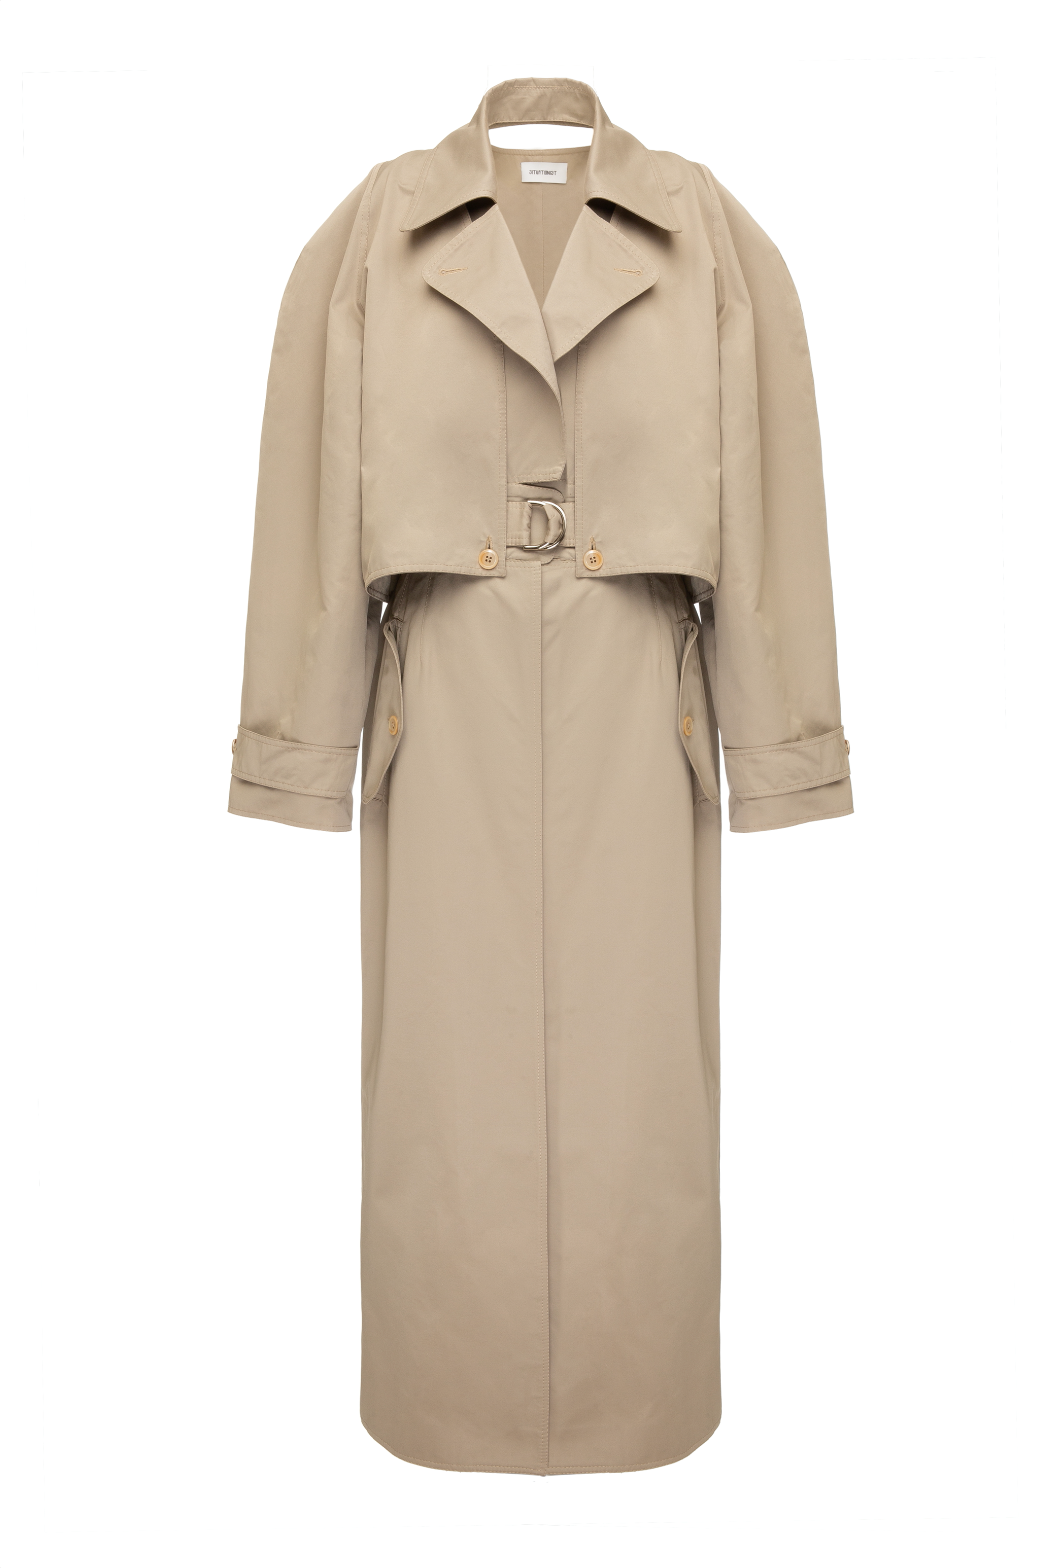 SITUATIONIST Beige Trench Coat